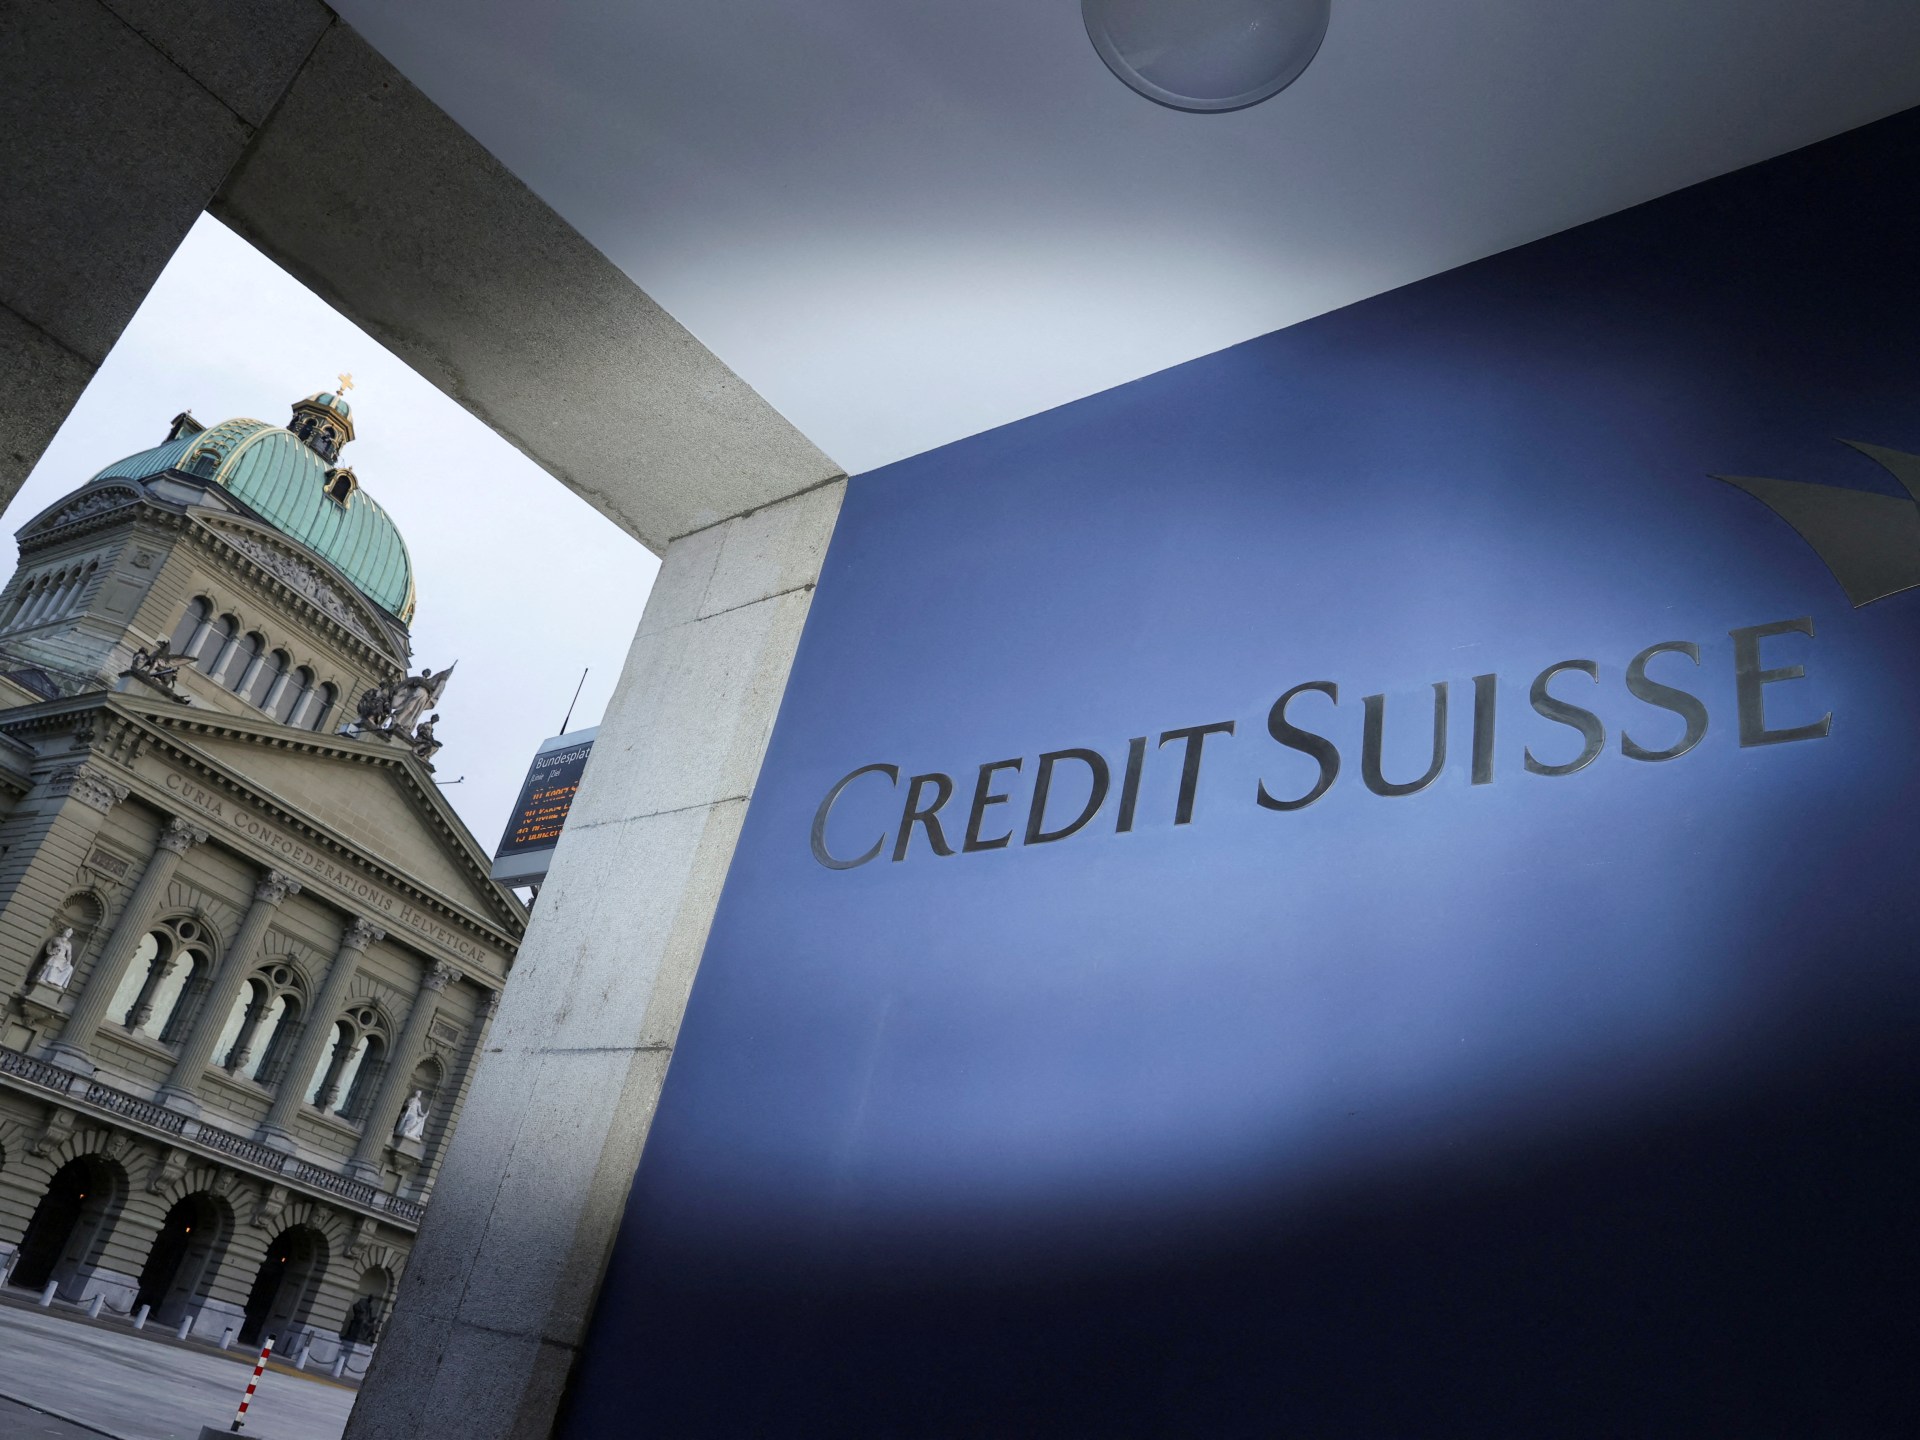 US says Credit Suisse violated deal on rich clients’ tax evasion | Business and Economy News